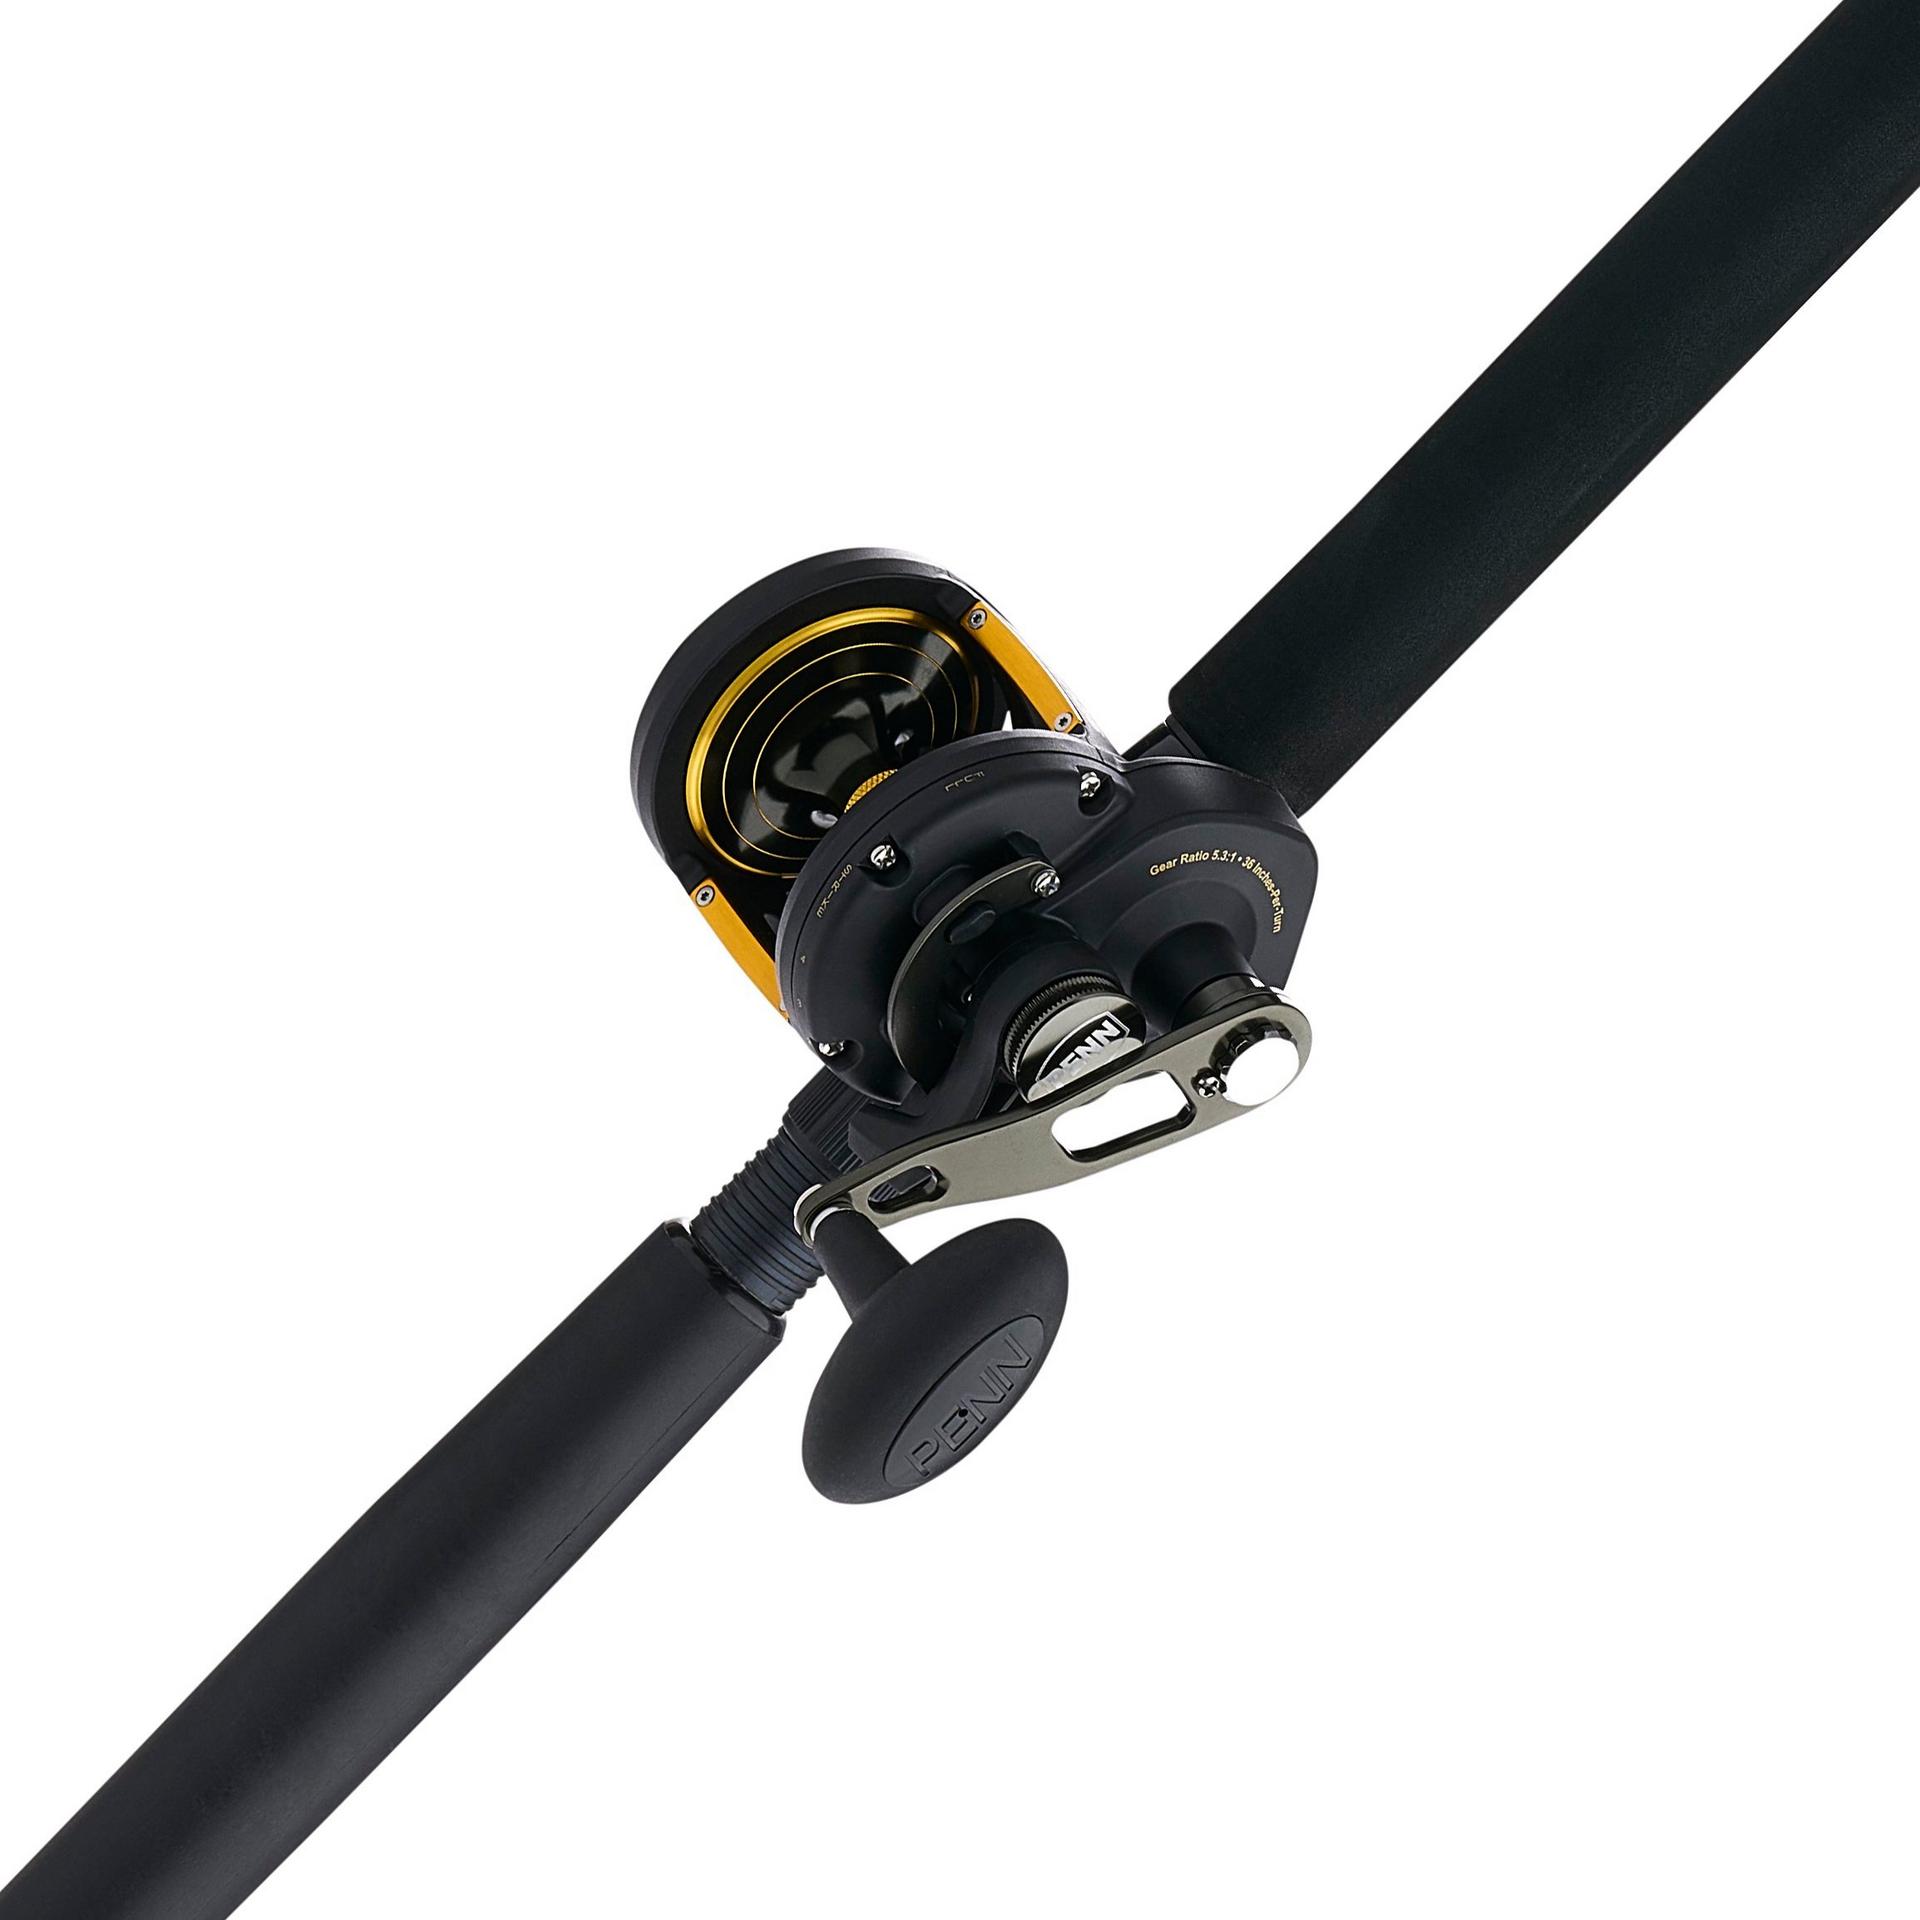 All Saltwater Trolling Combo Saltwater Fishing Rod & Reel Combos